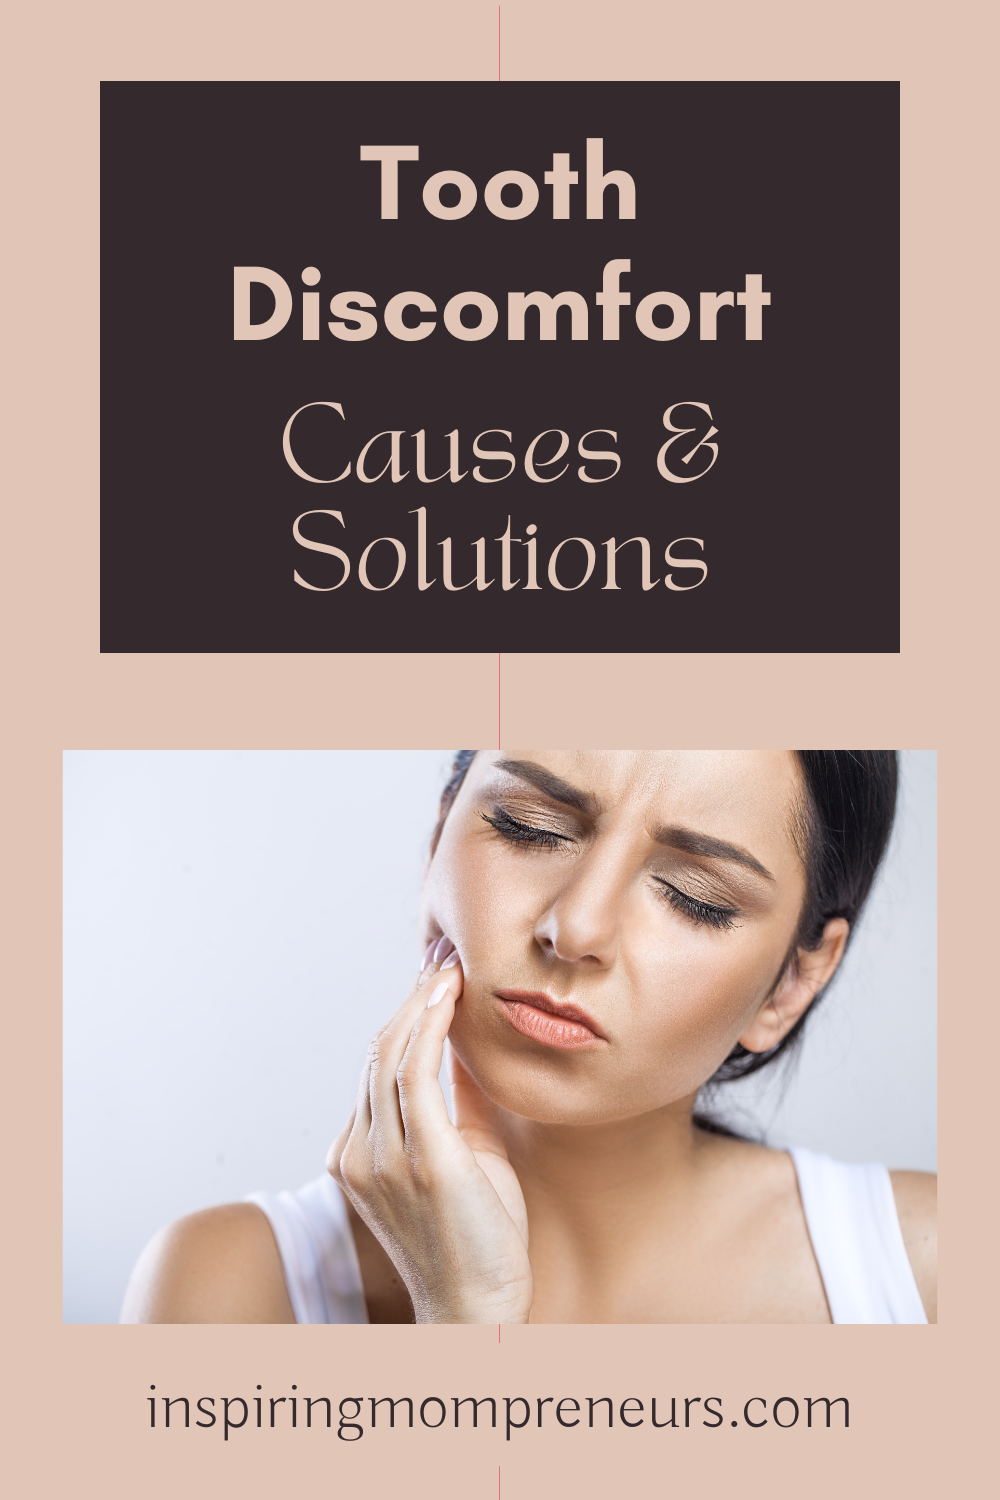 Tooth discomfort can range from a minor annoyance to being debilitating, and can be caused by a variety of factors. Here are 5 common causes and 6 solutions.